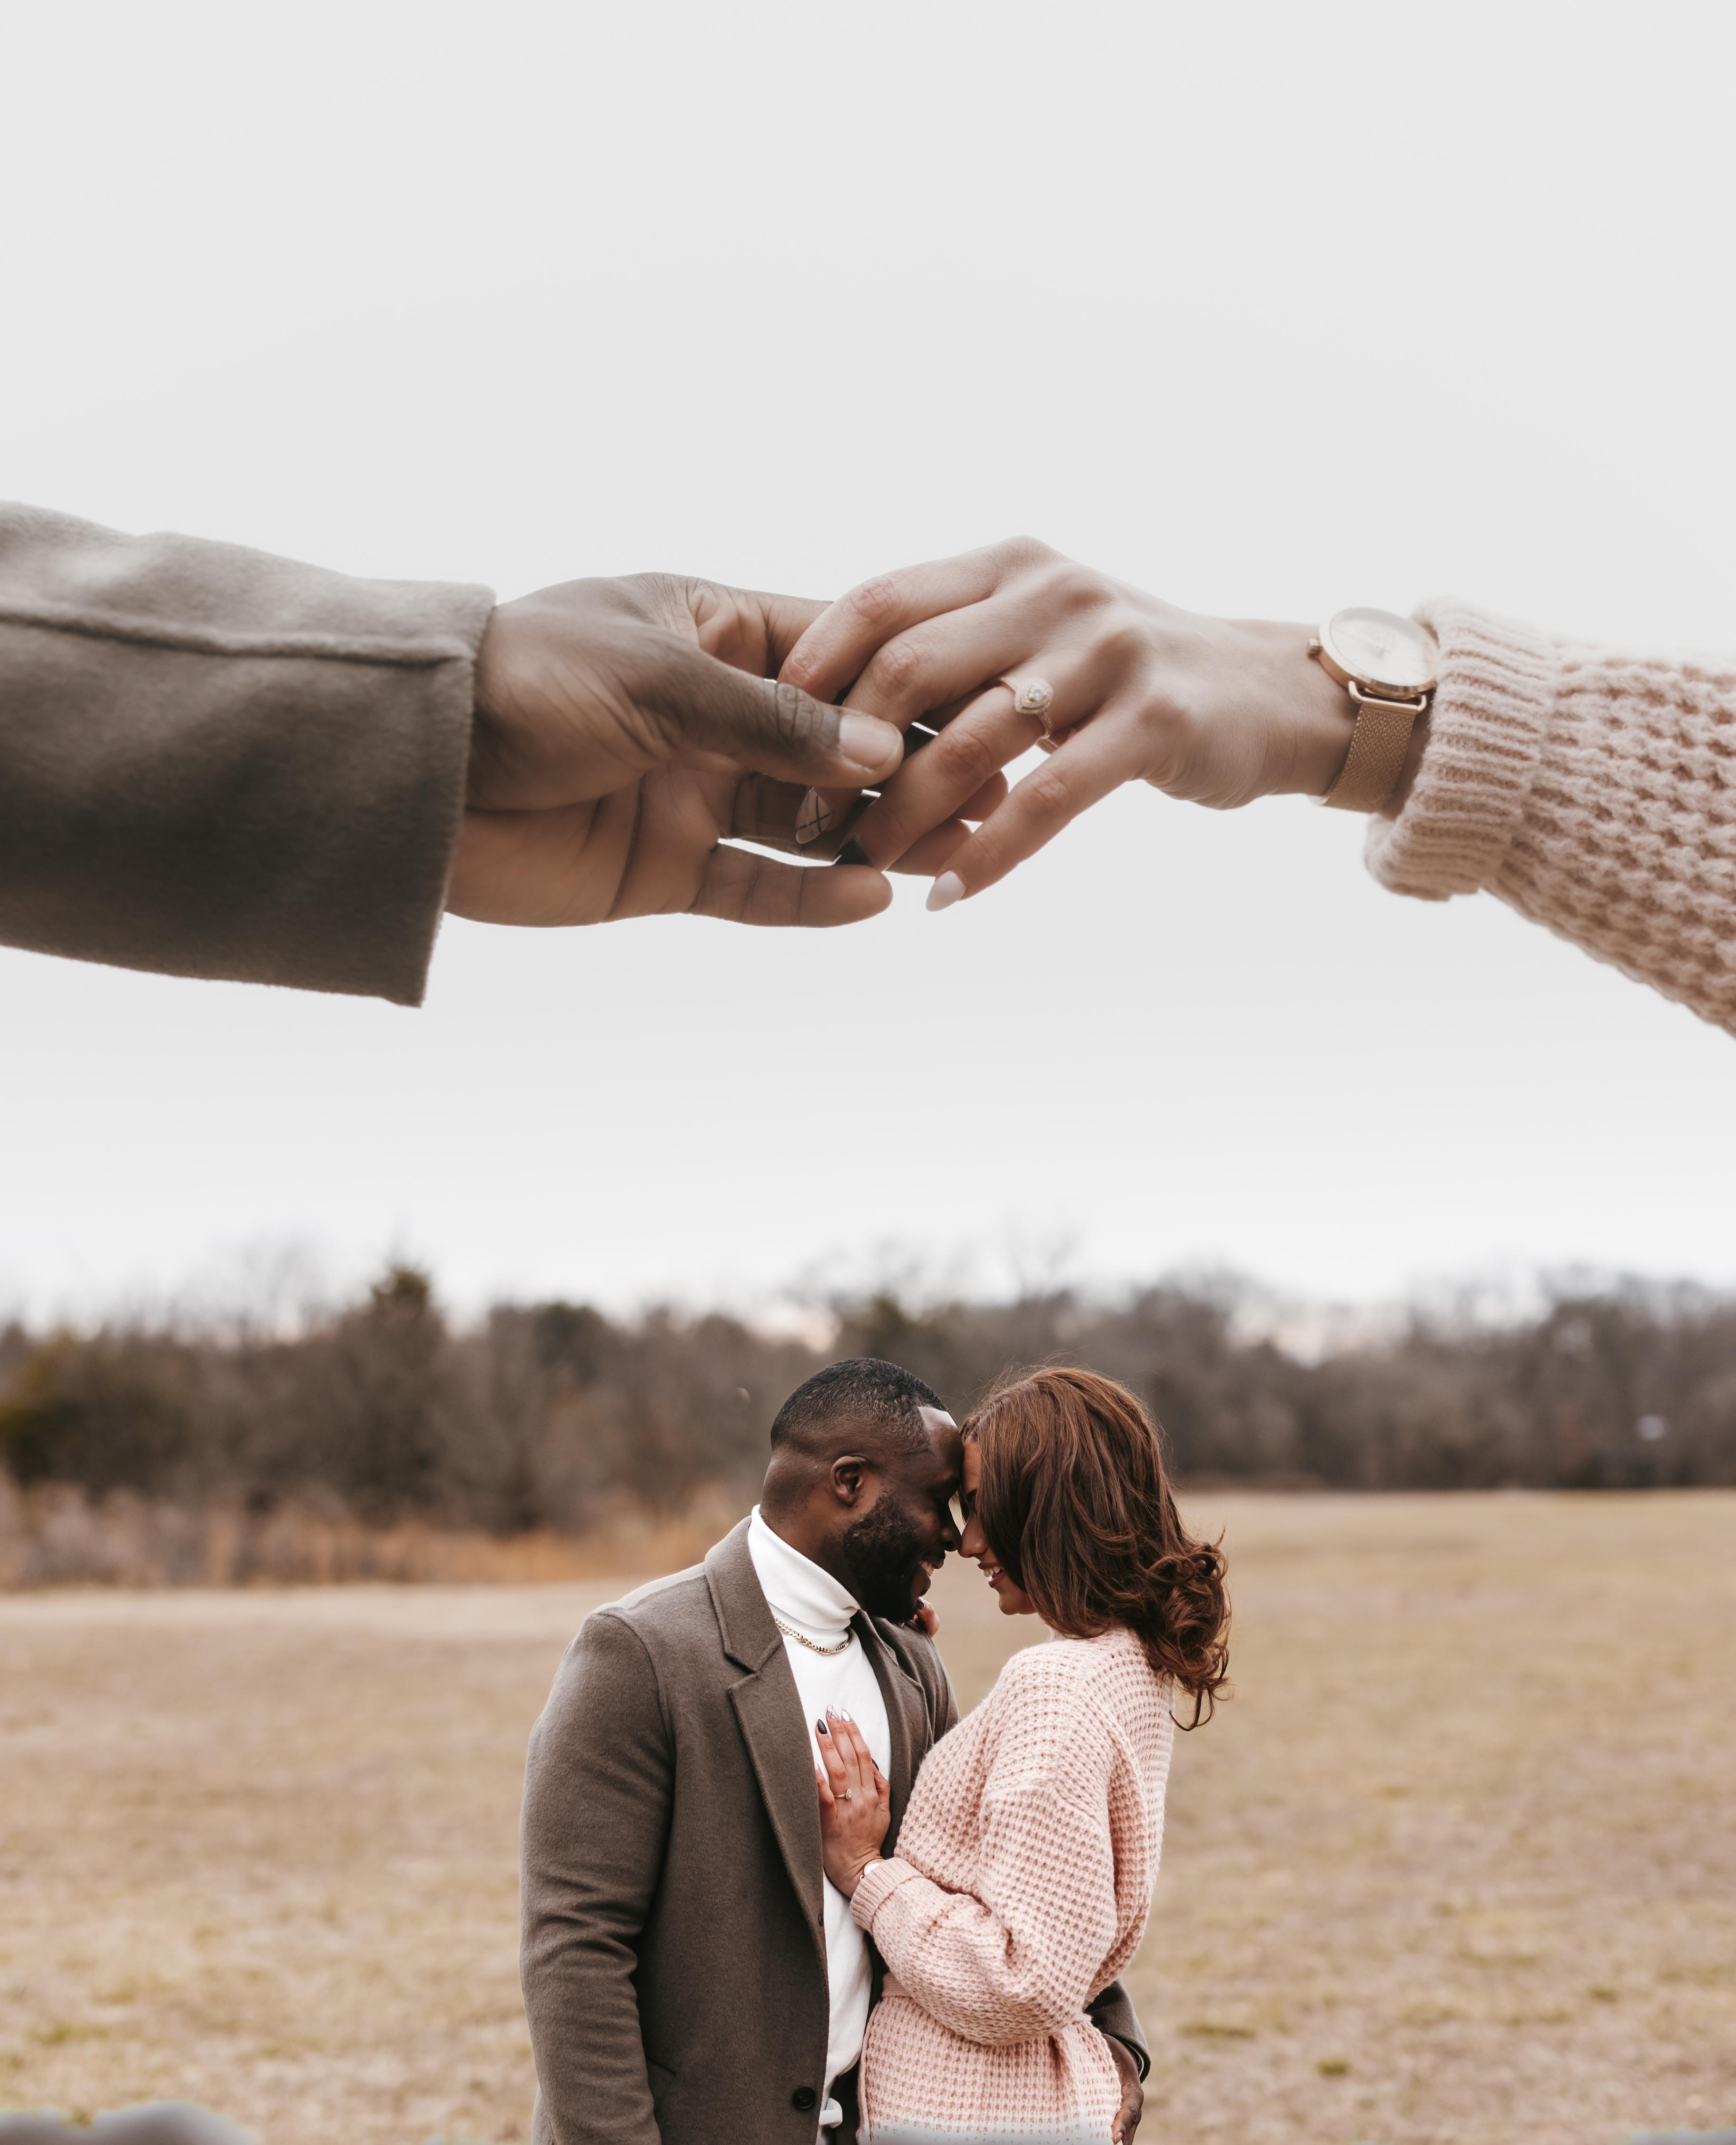 The Wedding Website of Cecily Ridgeway and Darnell Austin